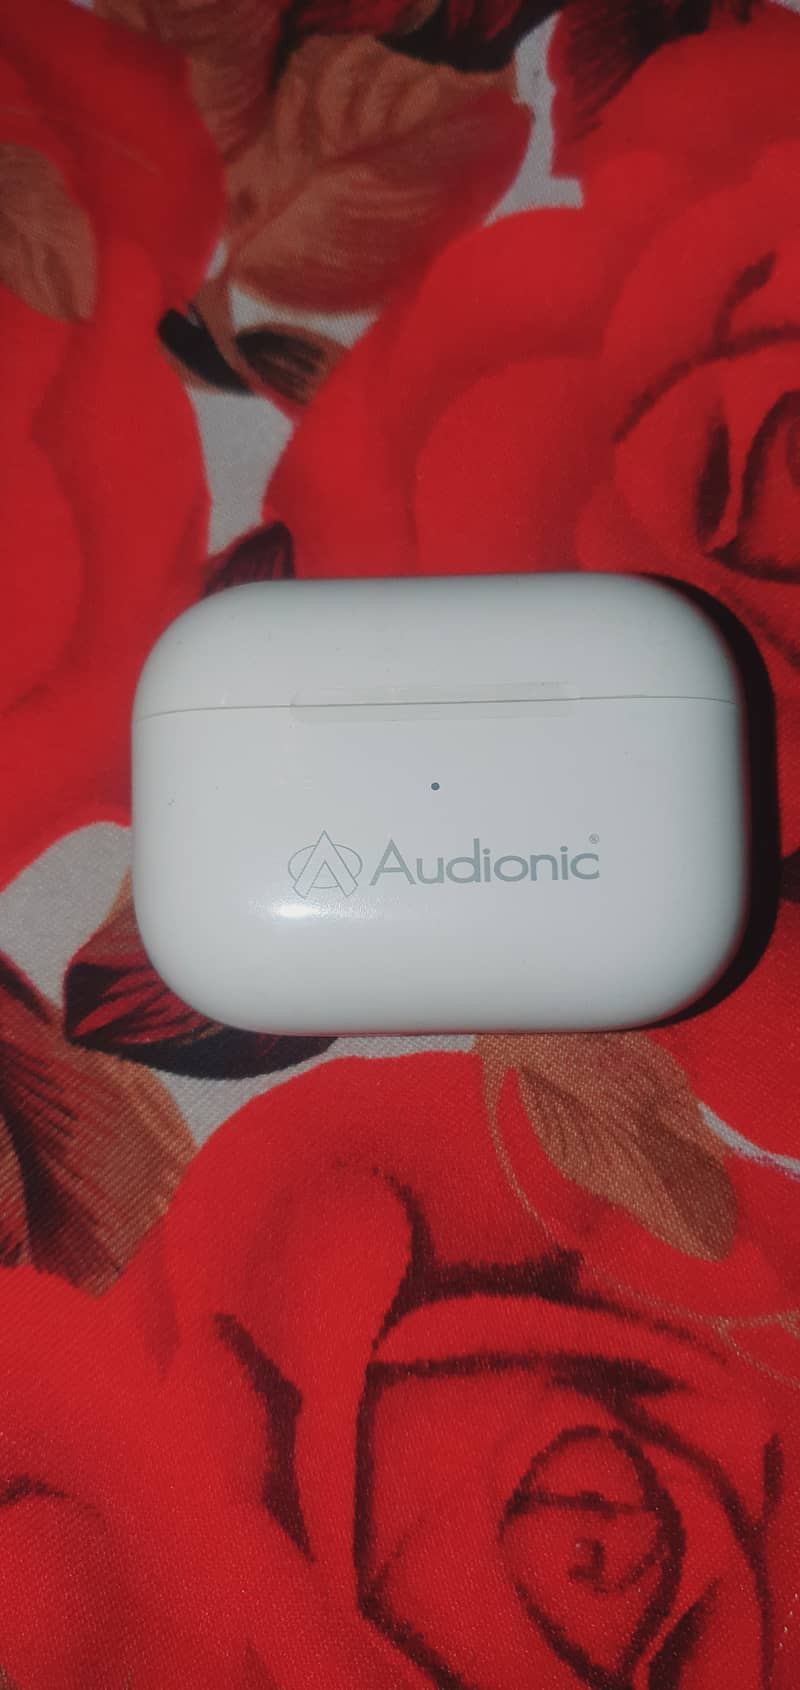 Audionic ear buds 10 by 10 cindition with box wilress charging suporte 0